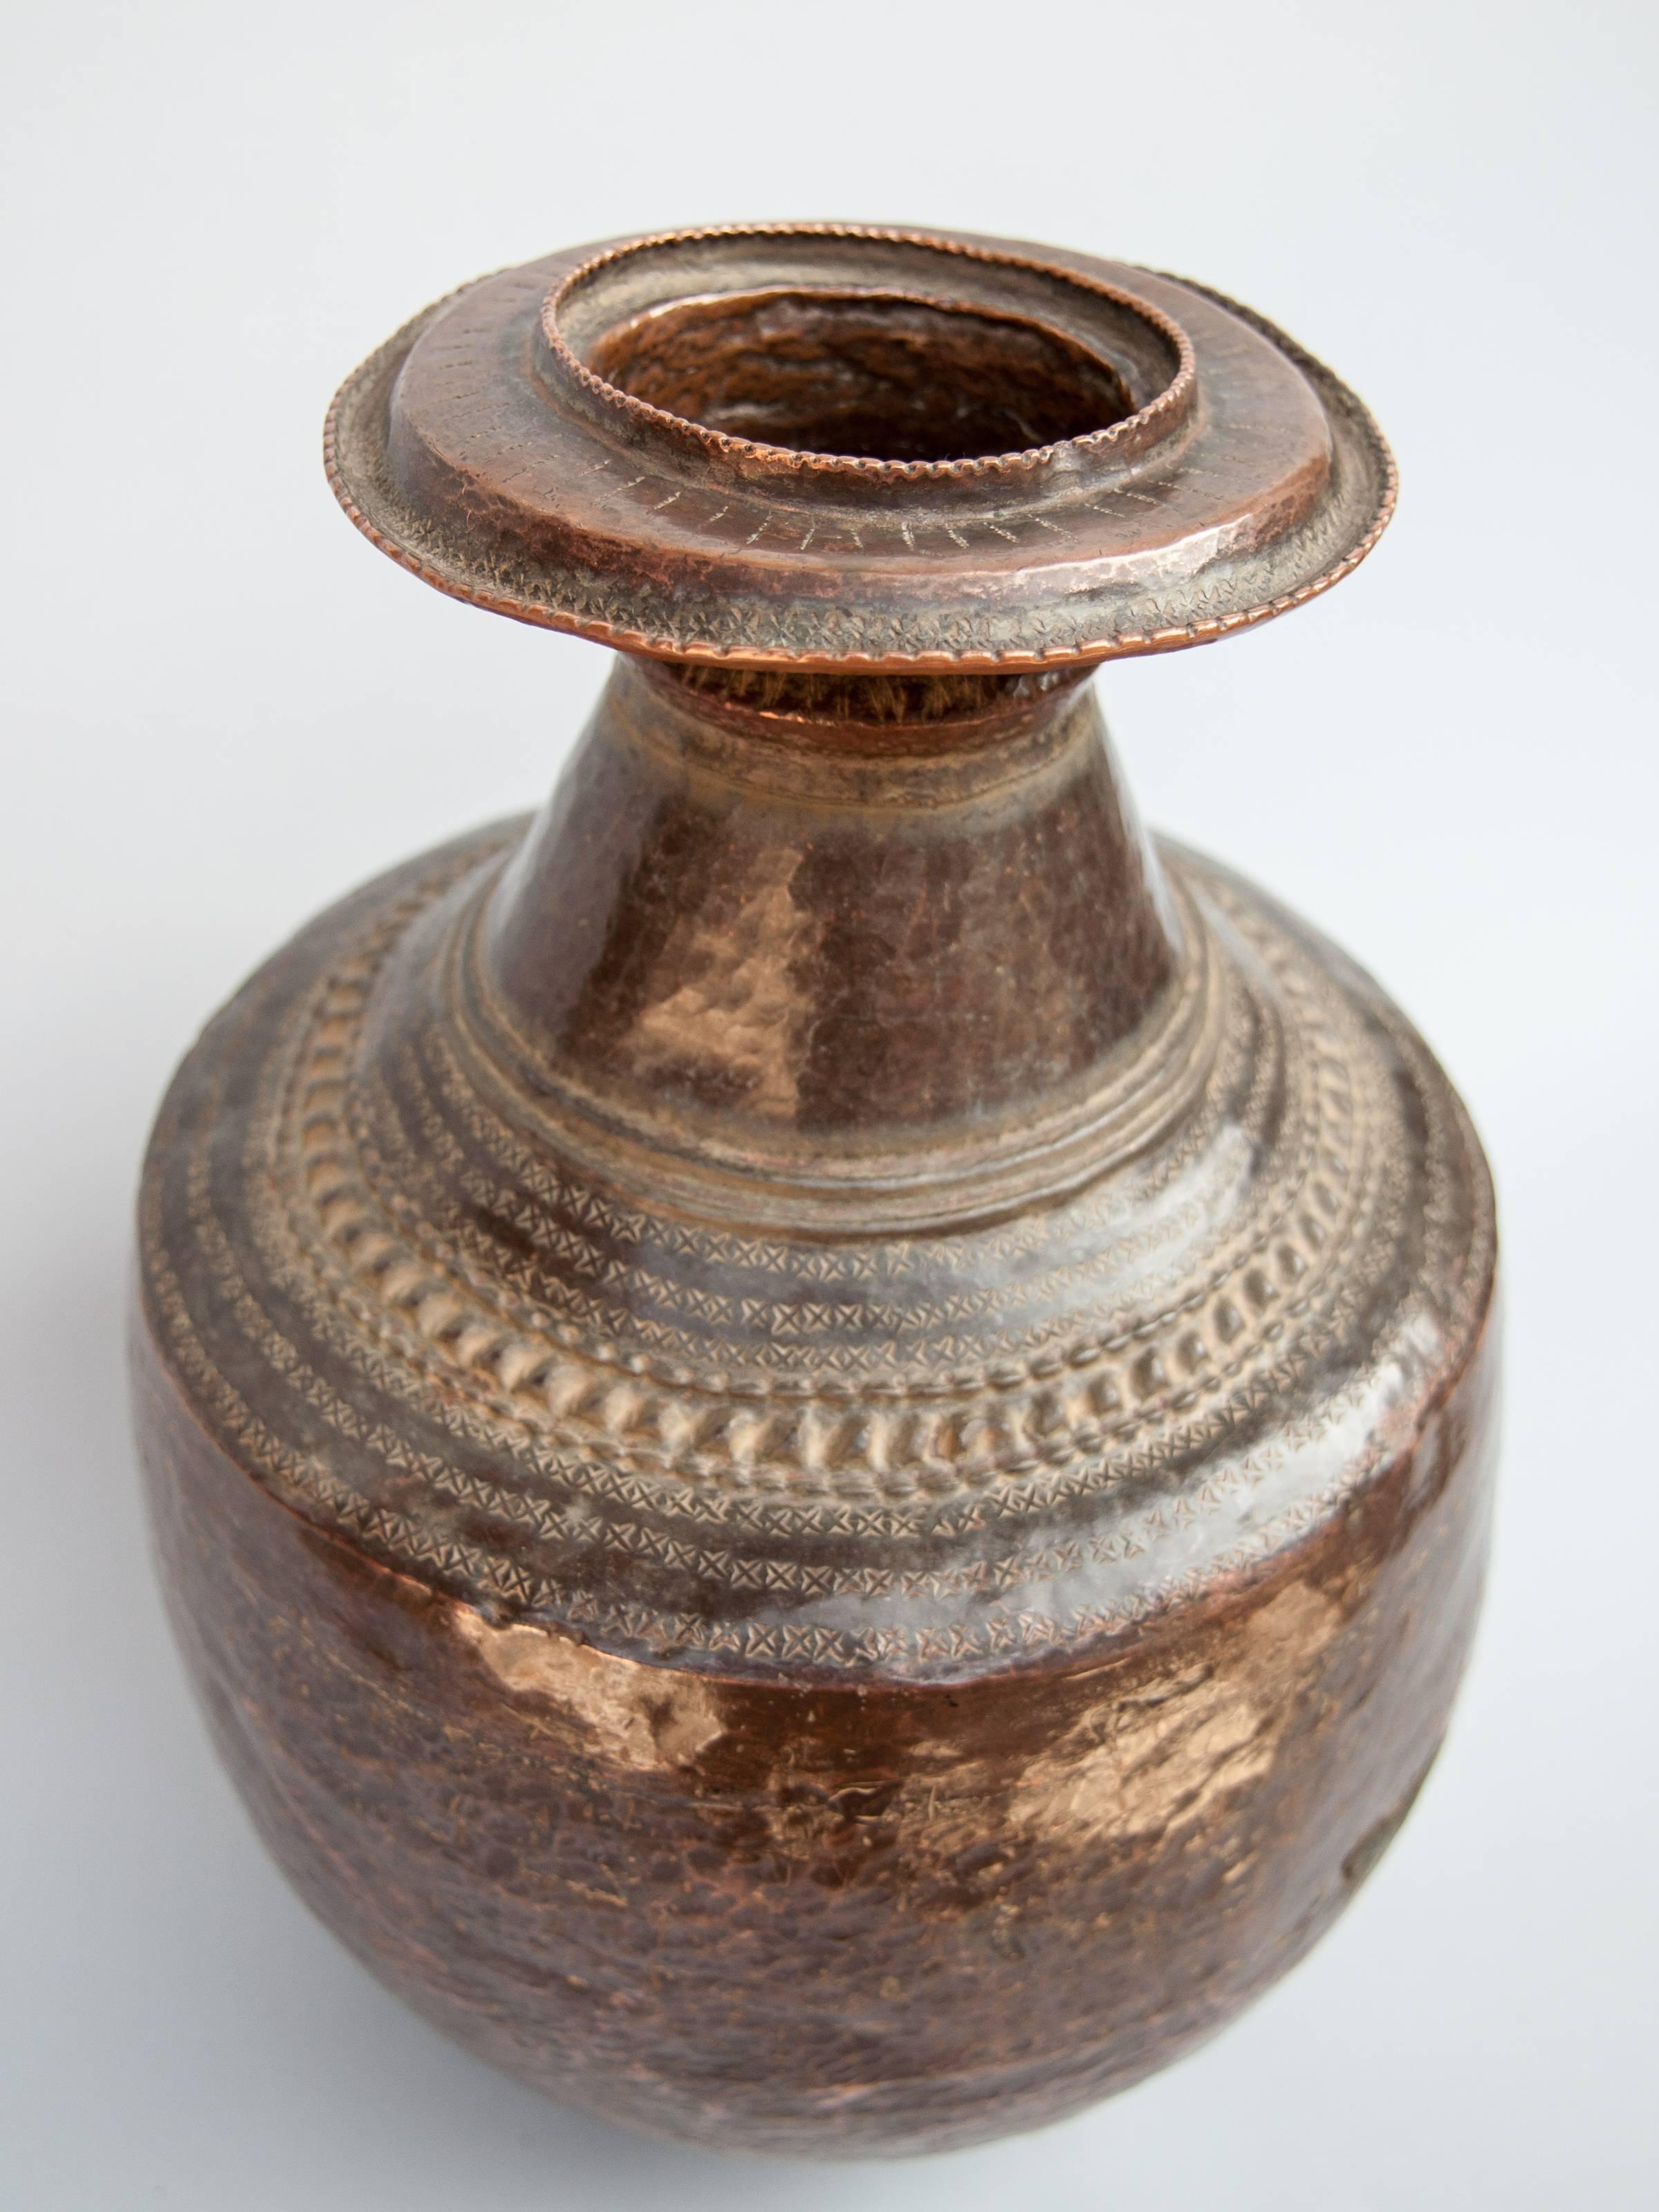 Metalwork Vintage Copper Water Pot from Nepal, Mid-20th Century